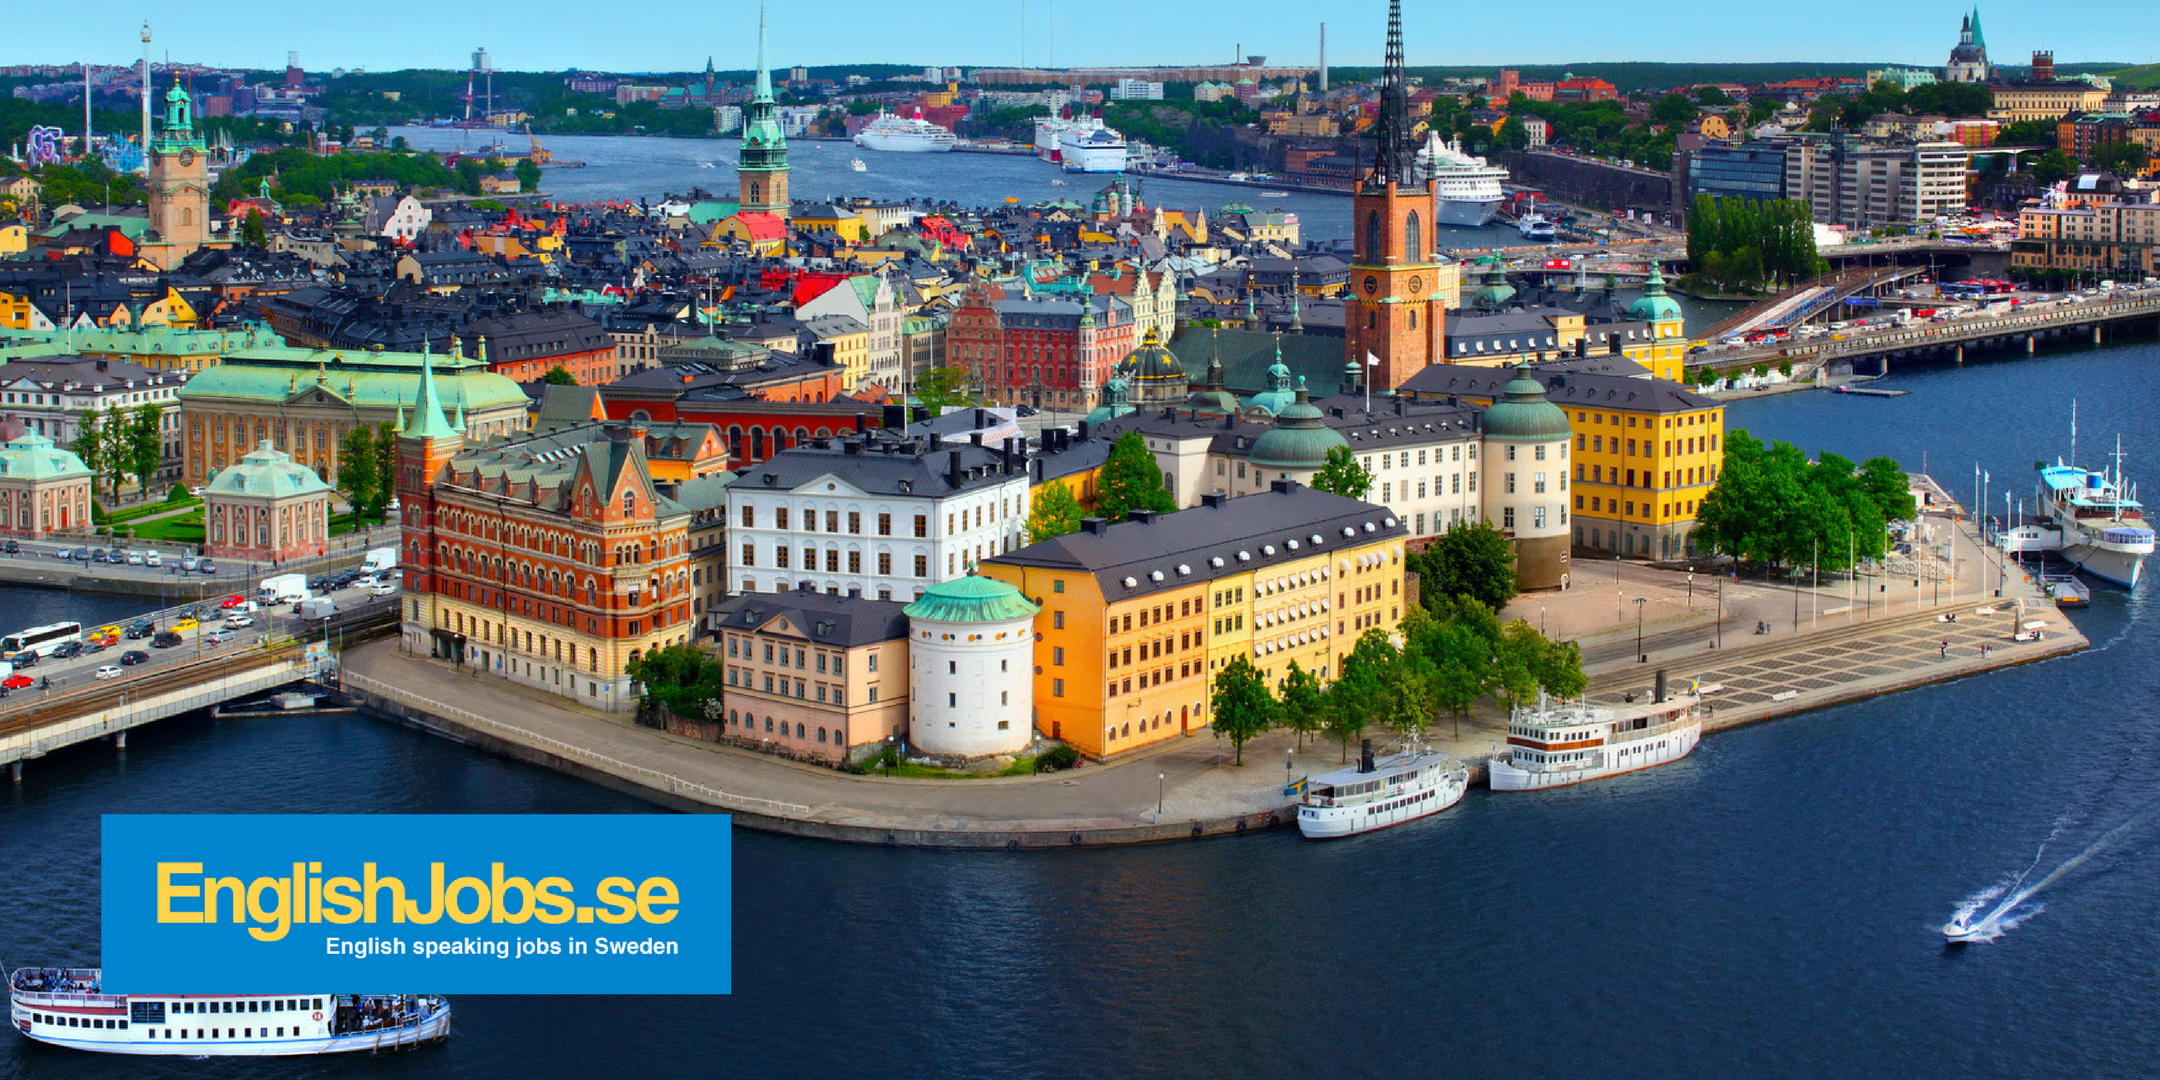 Work in Europe (Sweden, Denmark, Germany) - Your job search from LA to Stockholm